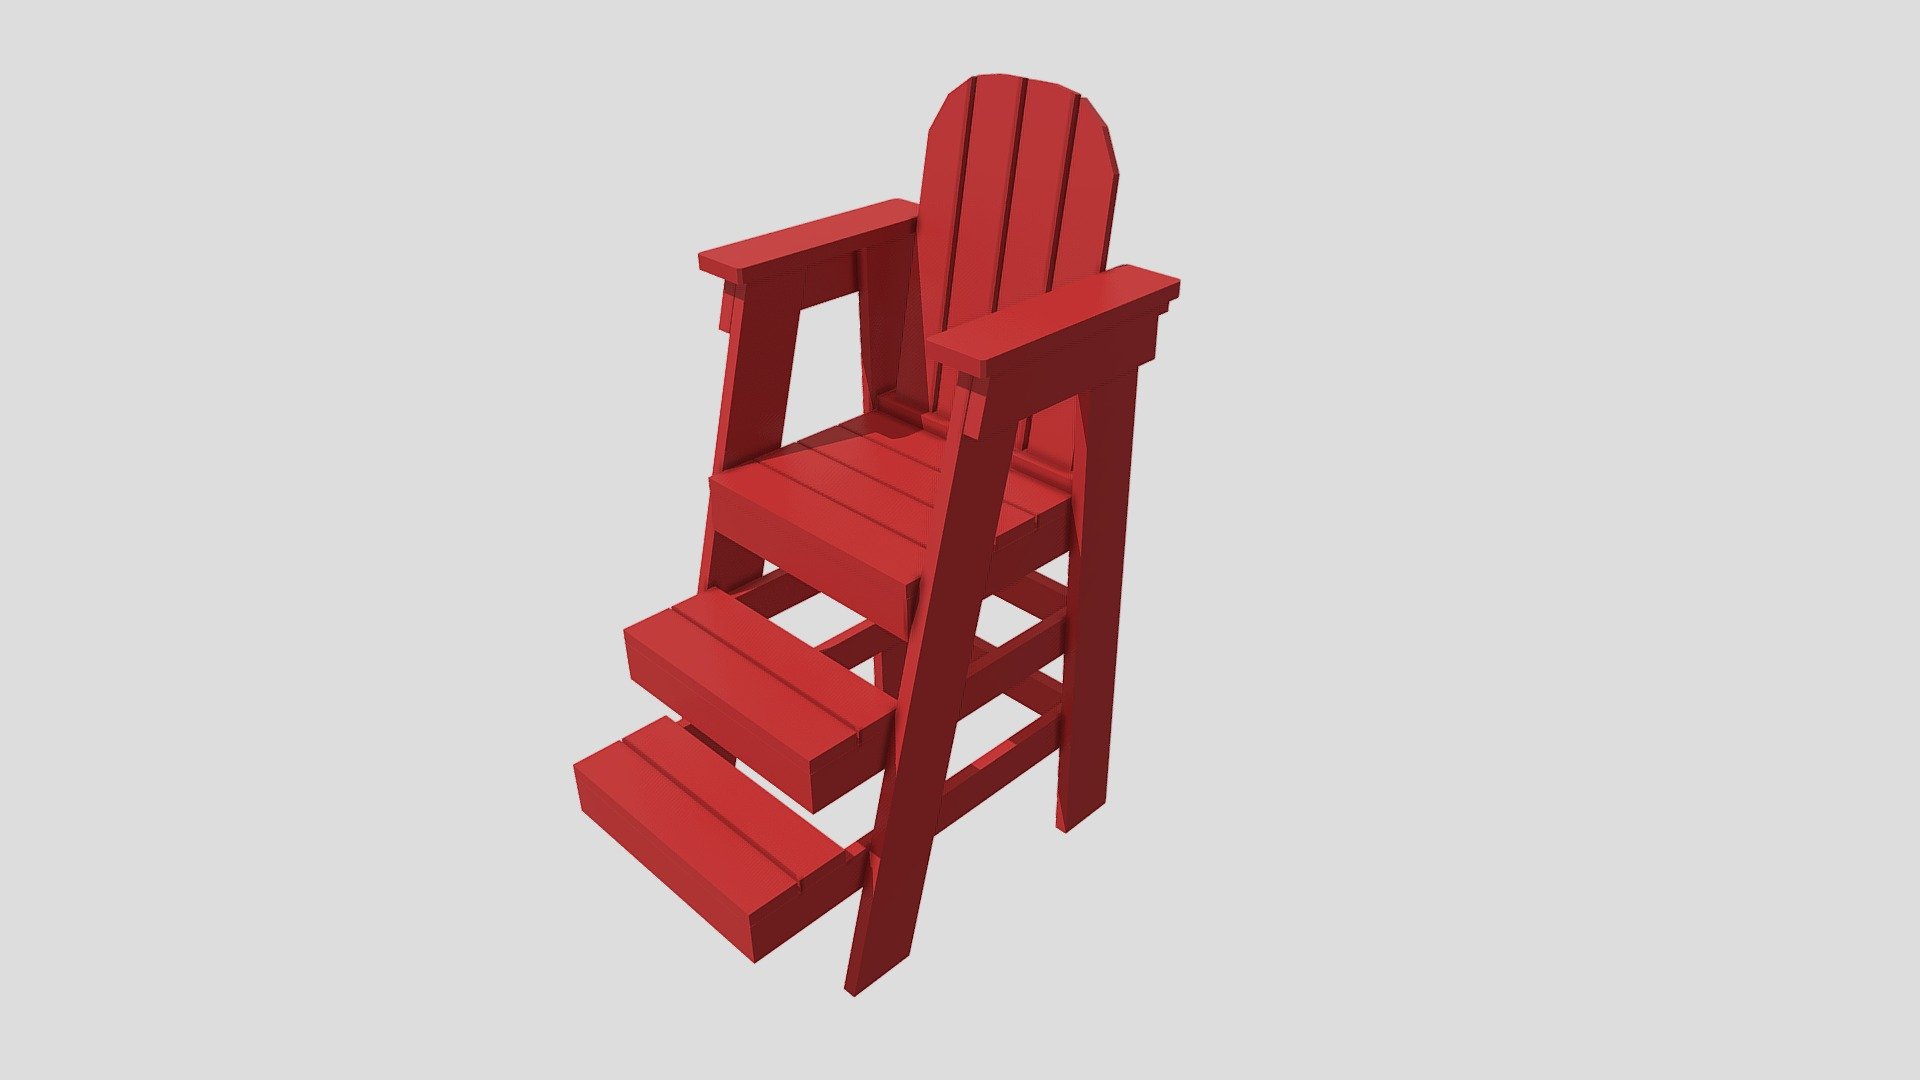 Community Pool Lifeguard Chair. Free to use as asset in any project you need 3d model